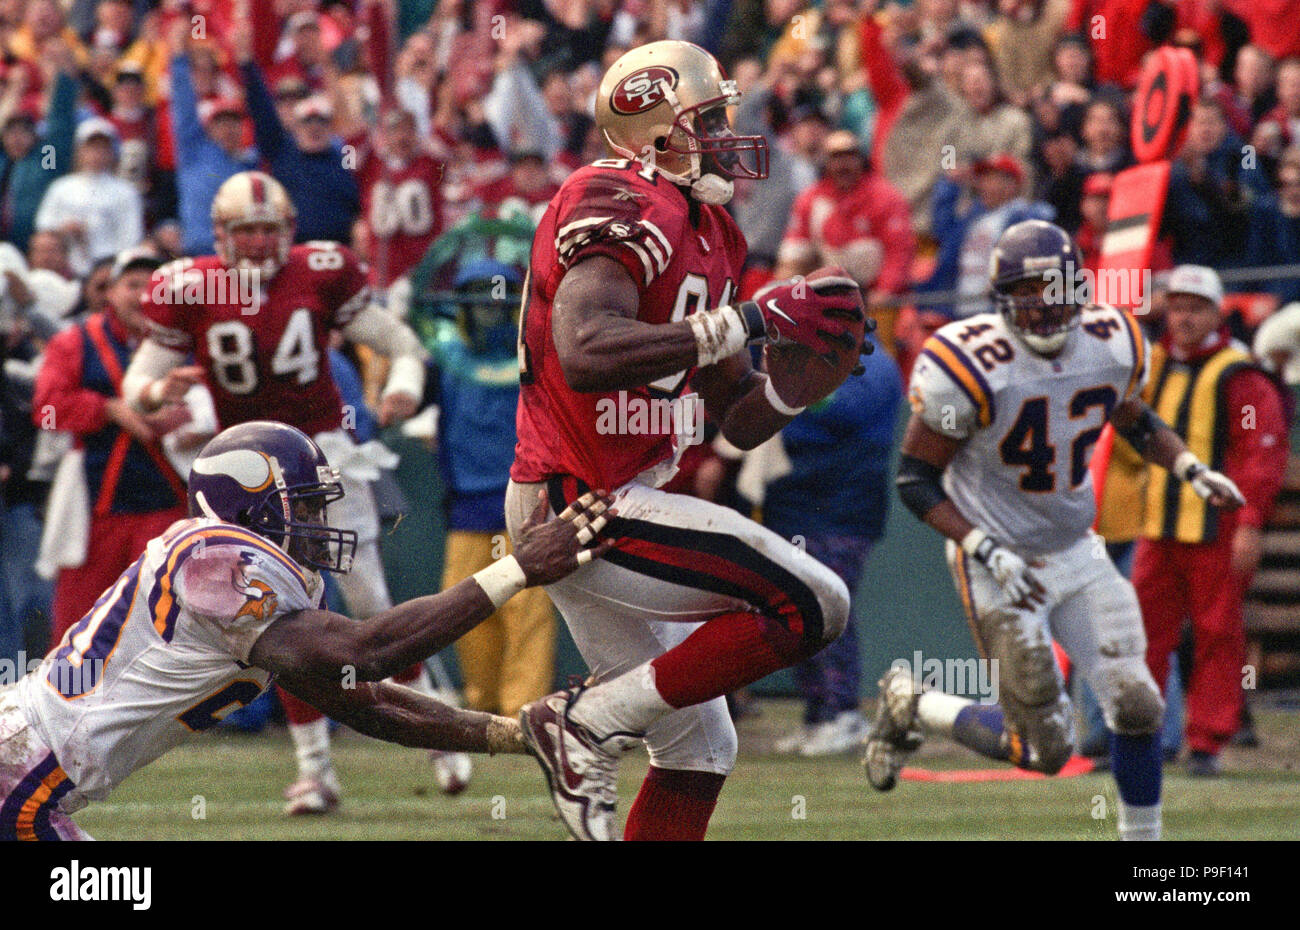 San Francisco, California, USA. 23rd Nov, 1997. San Francisco 49ers vs. San  Diego Charge at Candlestick Park Sunday, November 23, 1997. 49ers beat  Chargers 17-10. San Francisco 49ers wide receiver Terrell Owens (